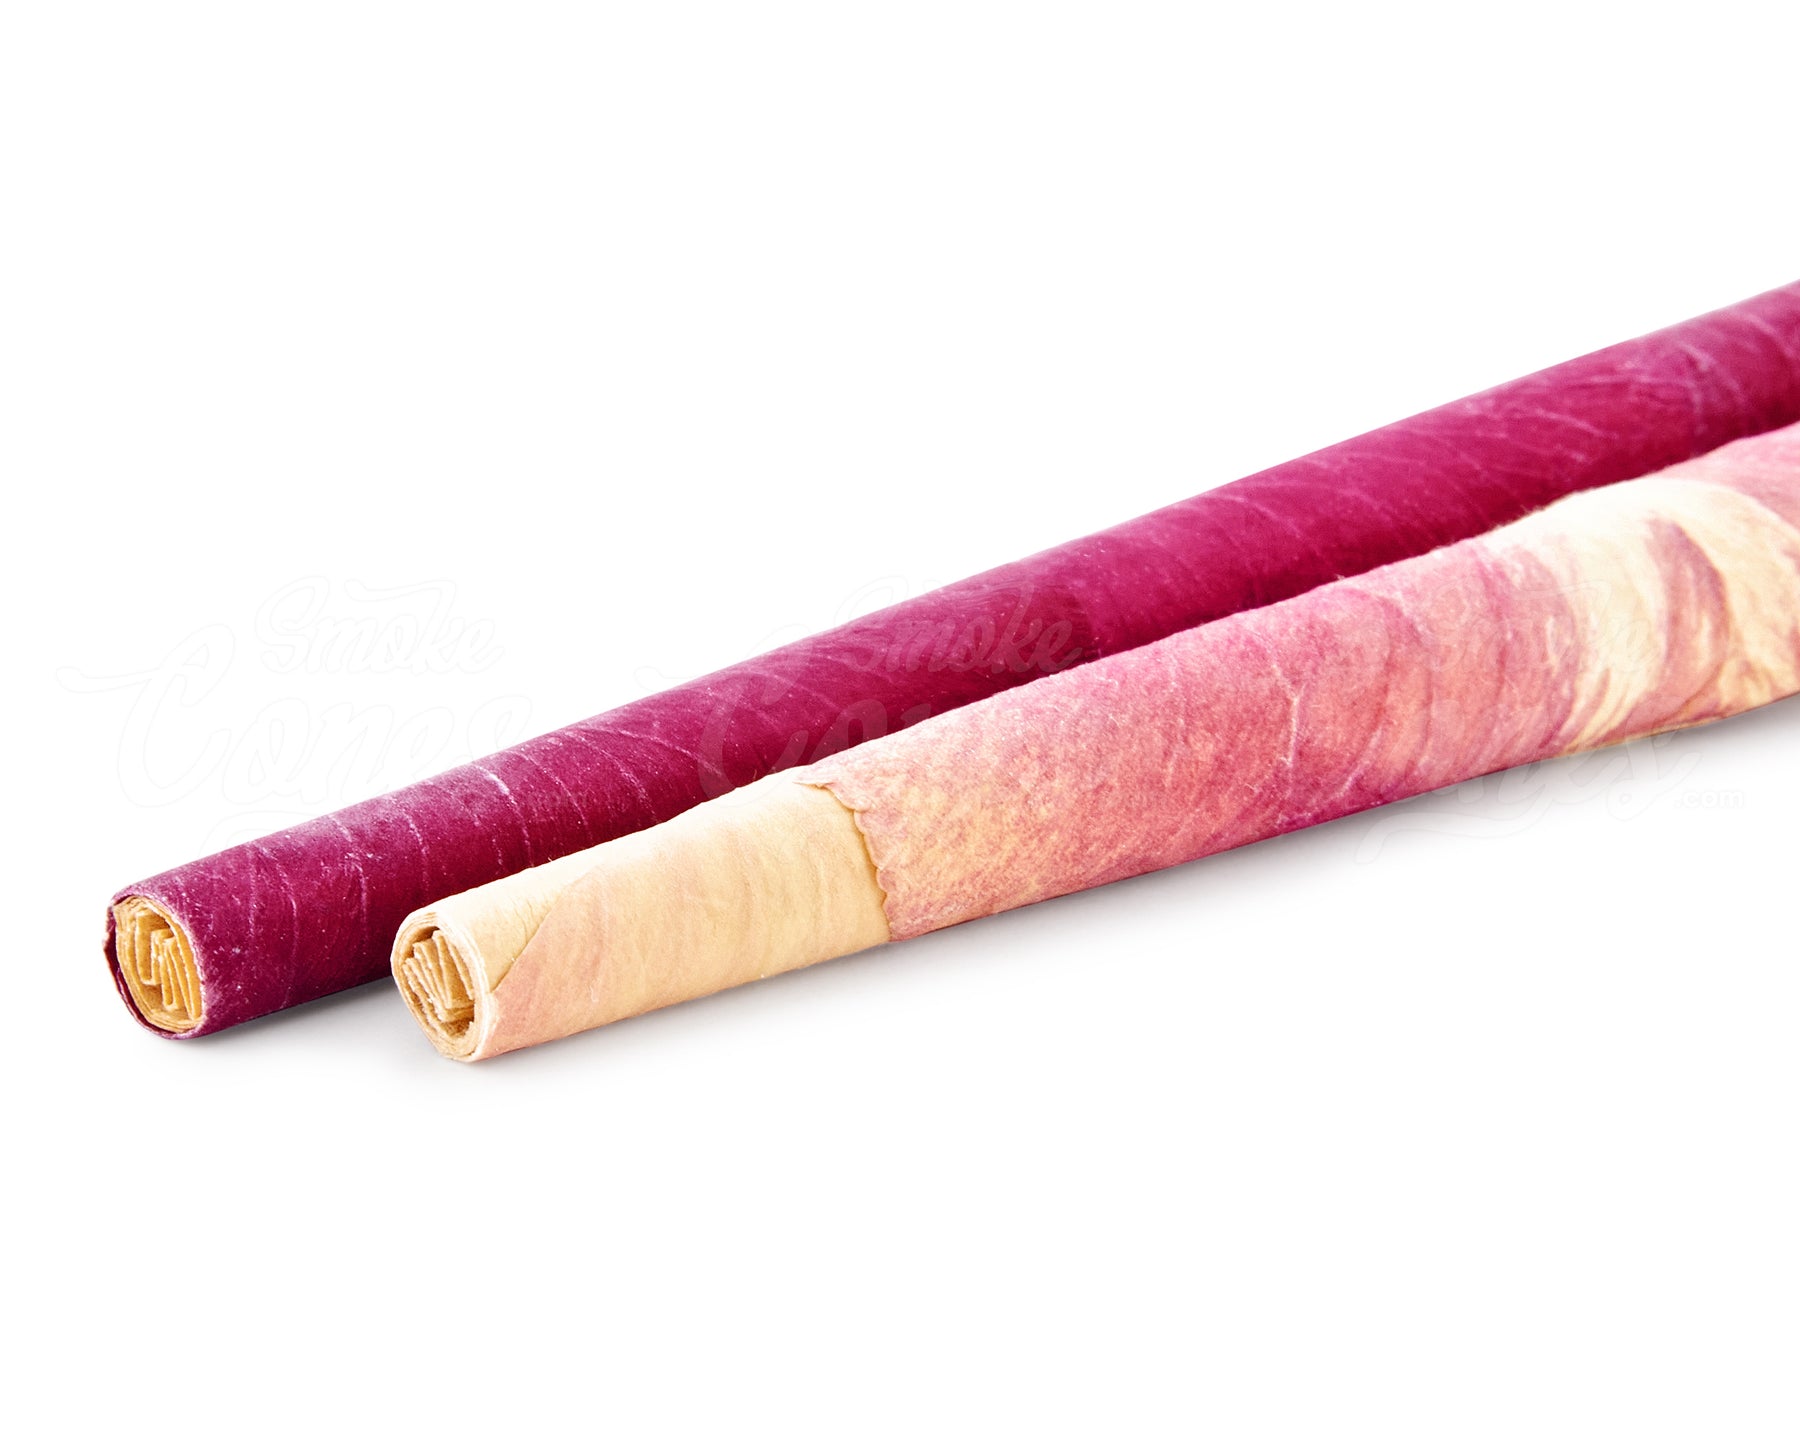 Rose Cones Flower Petal Prerolled Cone | 4 Cones | Natural Organic Rose  Petal Handrolled Cones Unrefined, Earthy, Organically Scented Rose Pre  Rolled